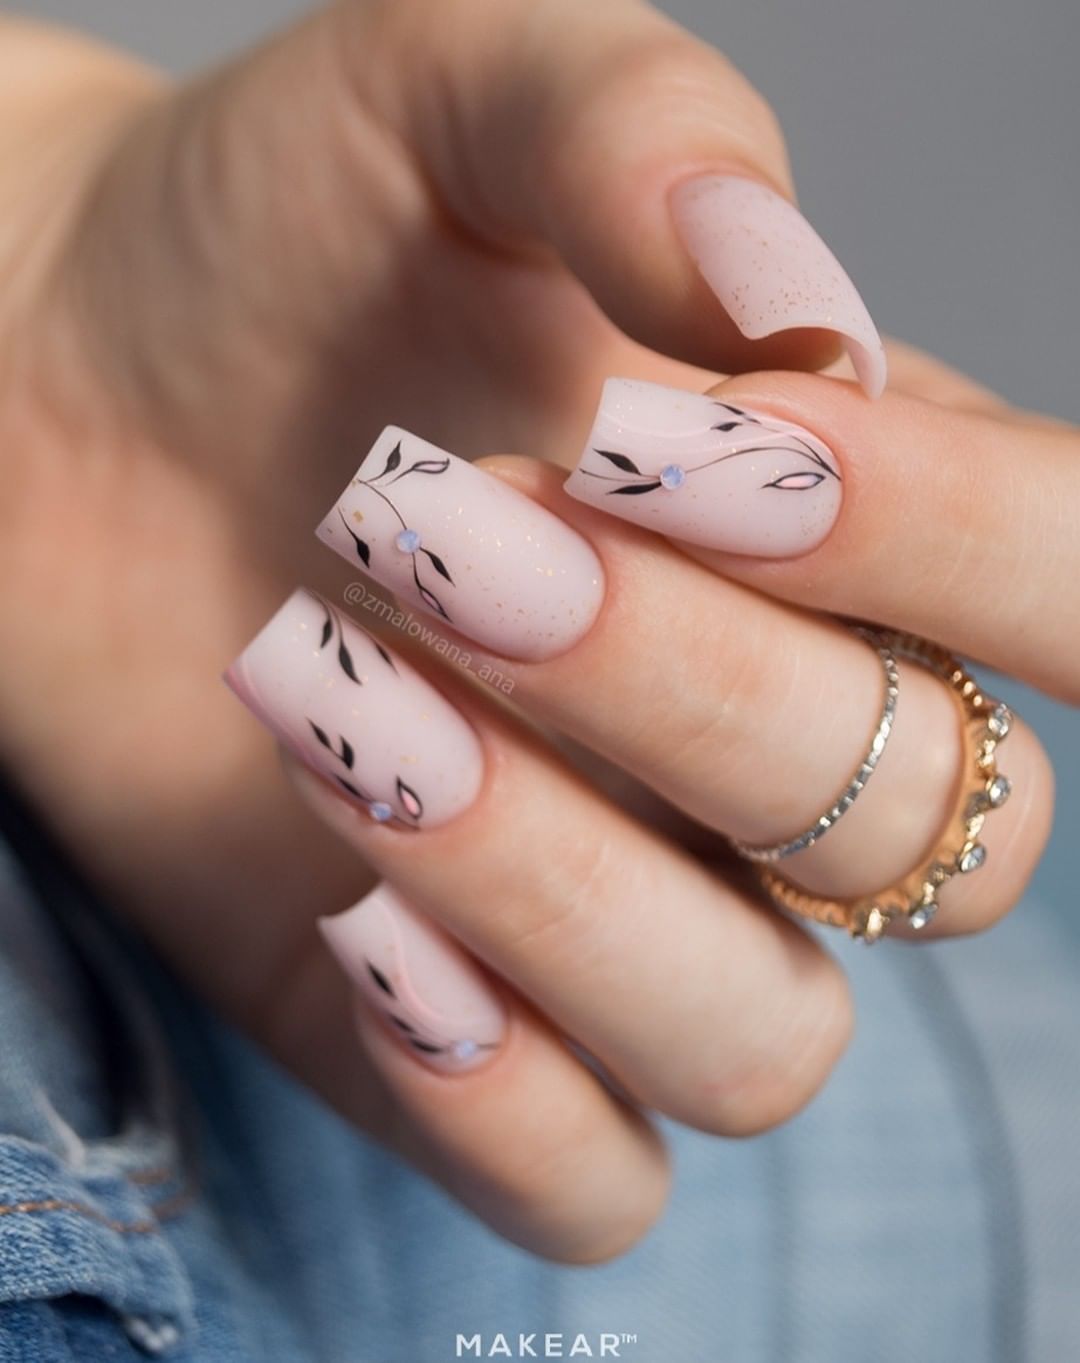 Most people apply shiny nail polish but just a few women who have a good taste get matte nails. For your best day in your life, let's show everyone that you have a good taste with a nude nail polish and leaf nail art.